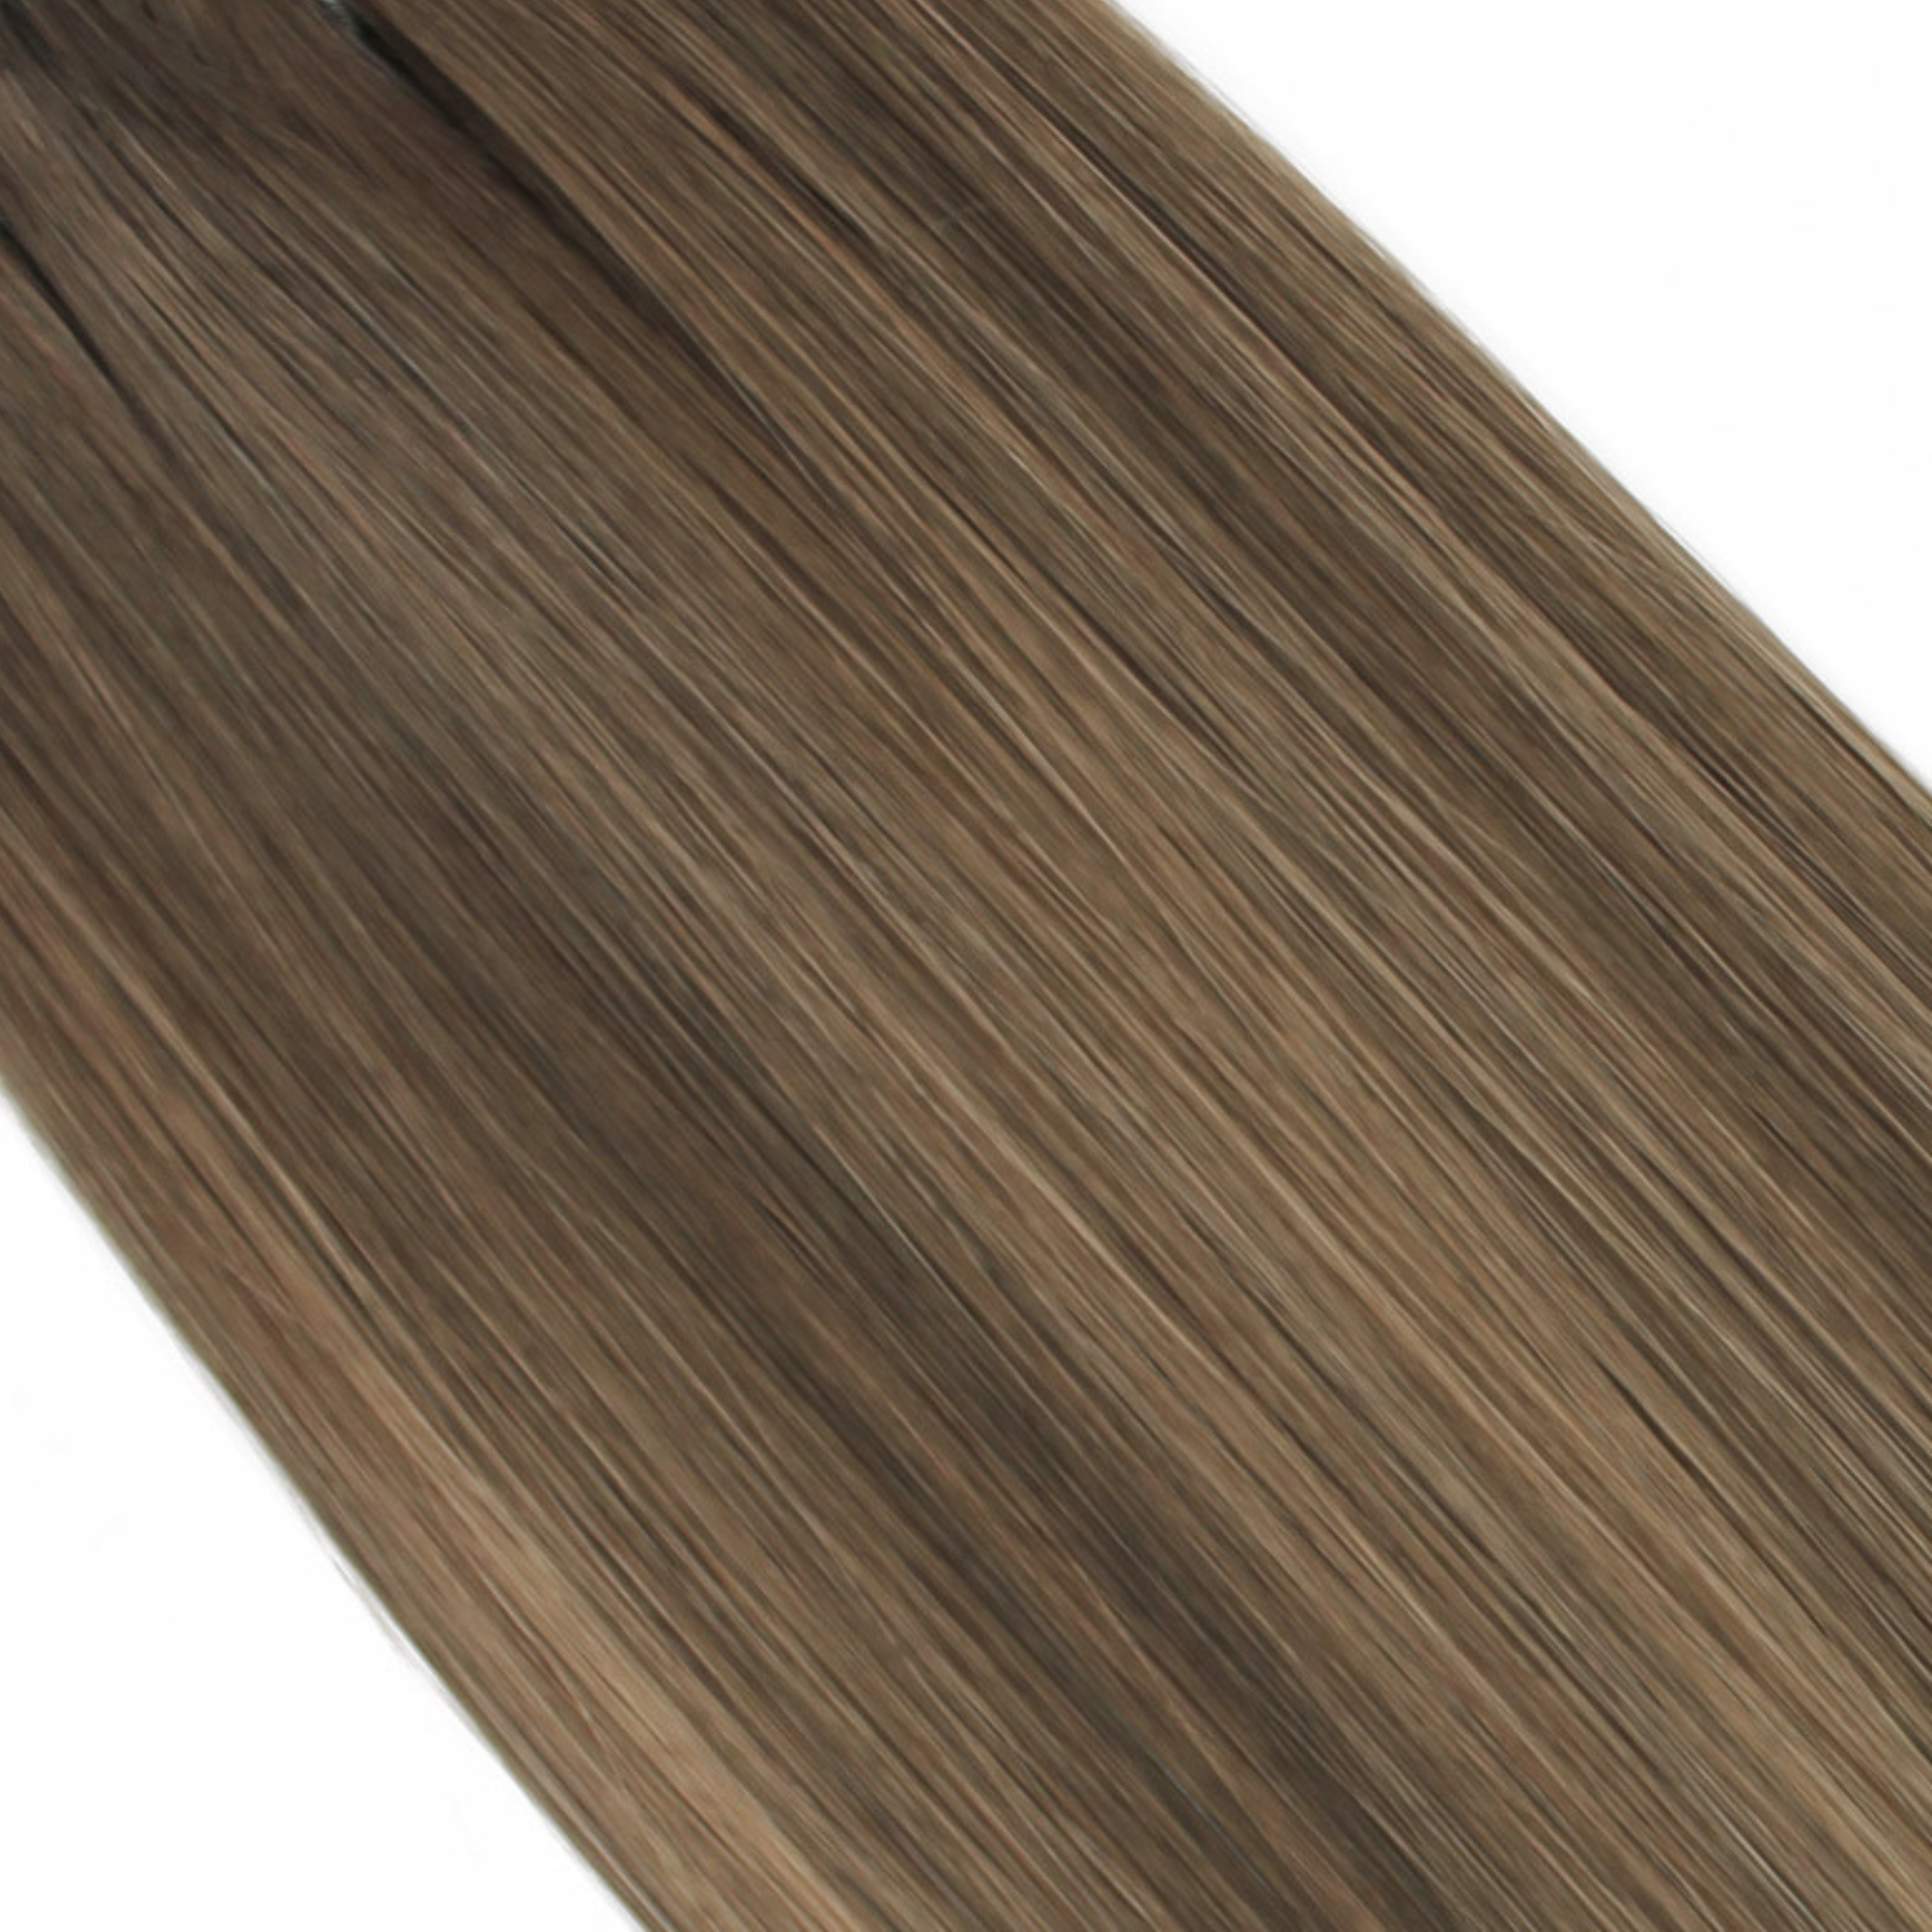 "hair rehab london 20" length 180 grams weight luxe clip-in hair extensions shade titled rooted caramel"